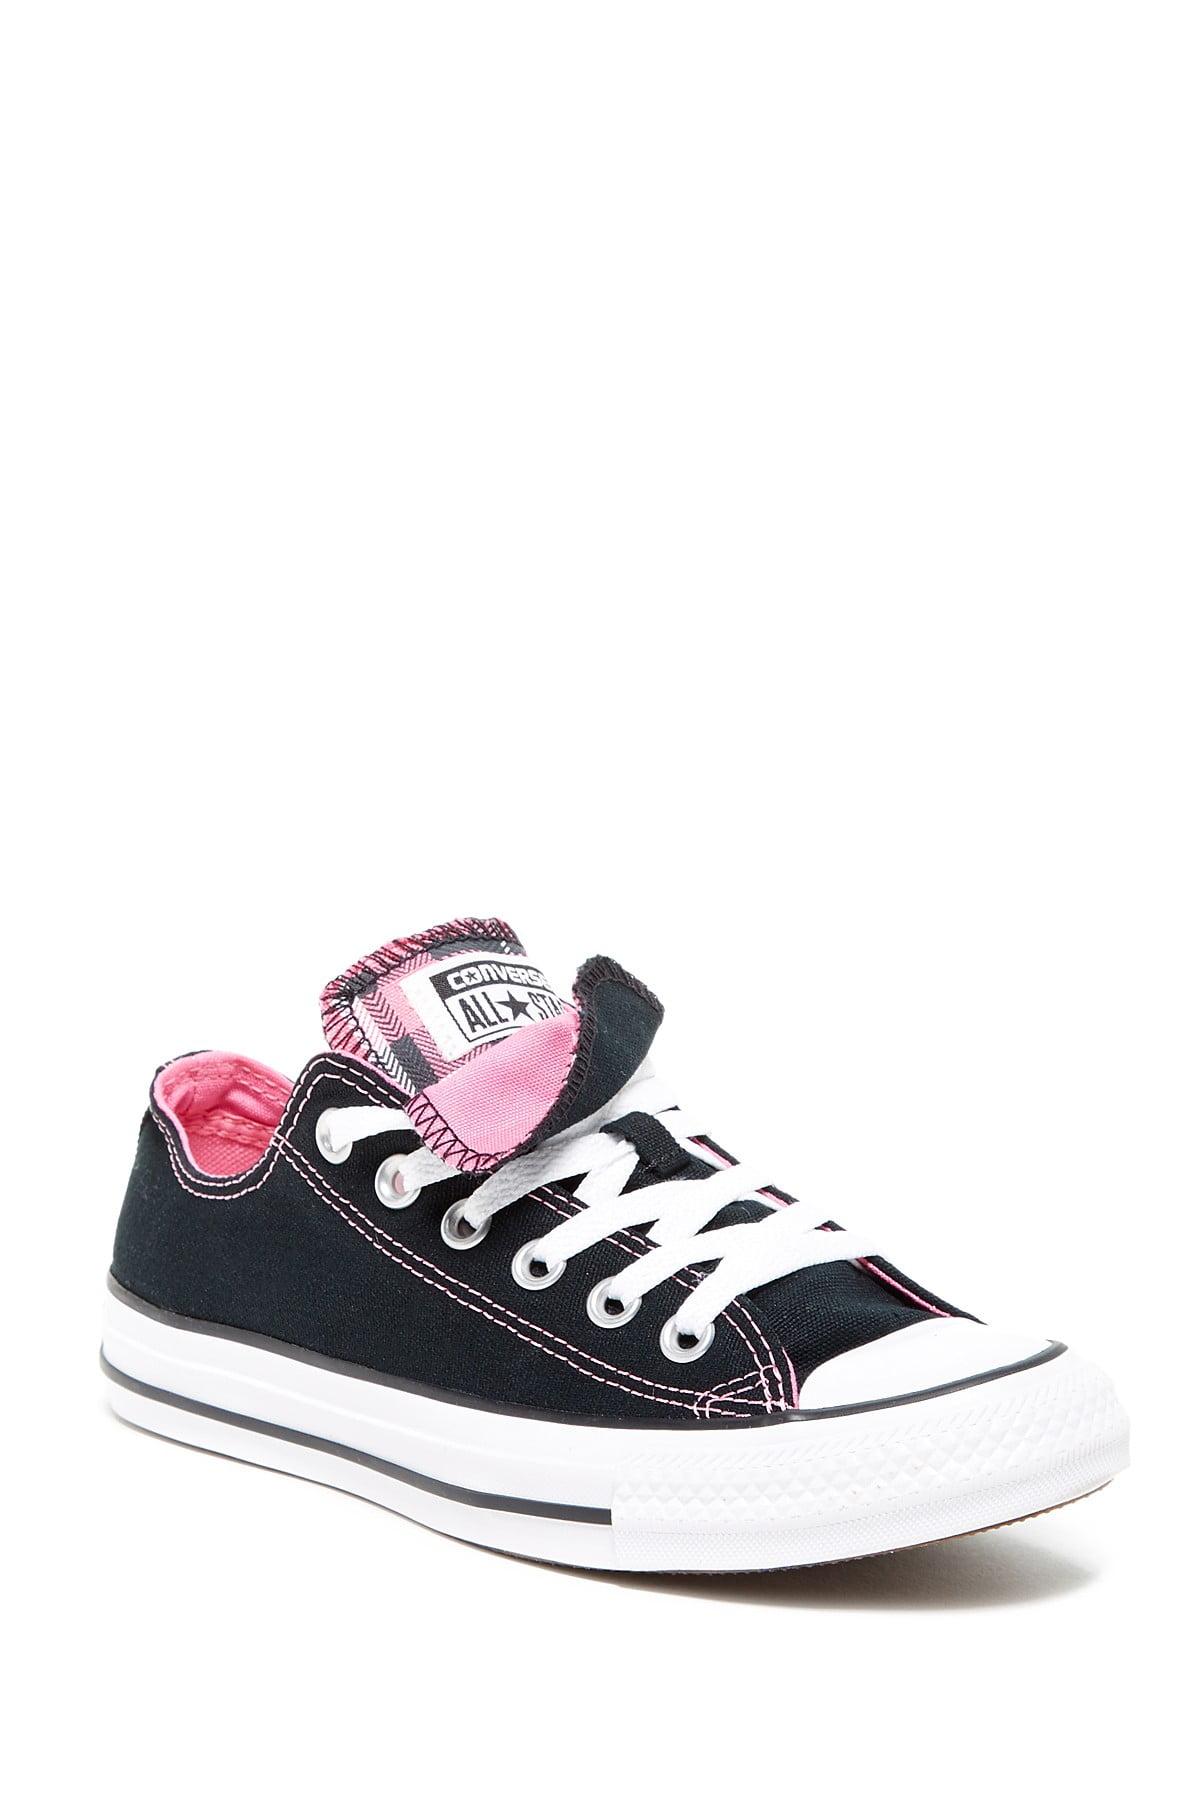 Converse Taylor Tongue Sneaker in Pink